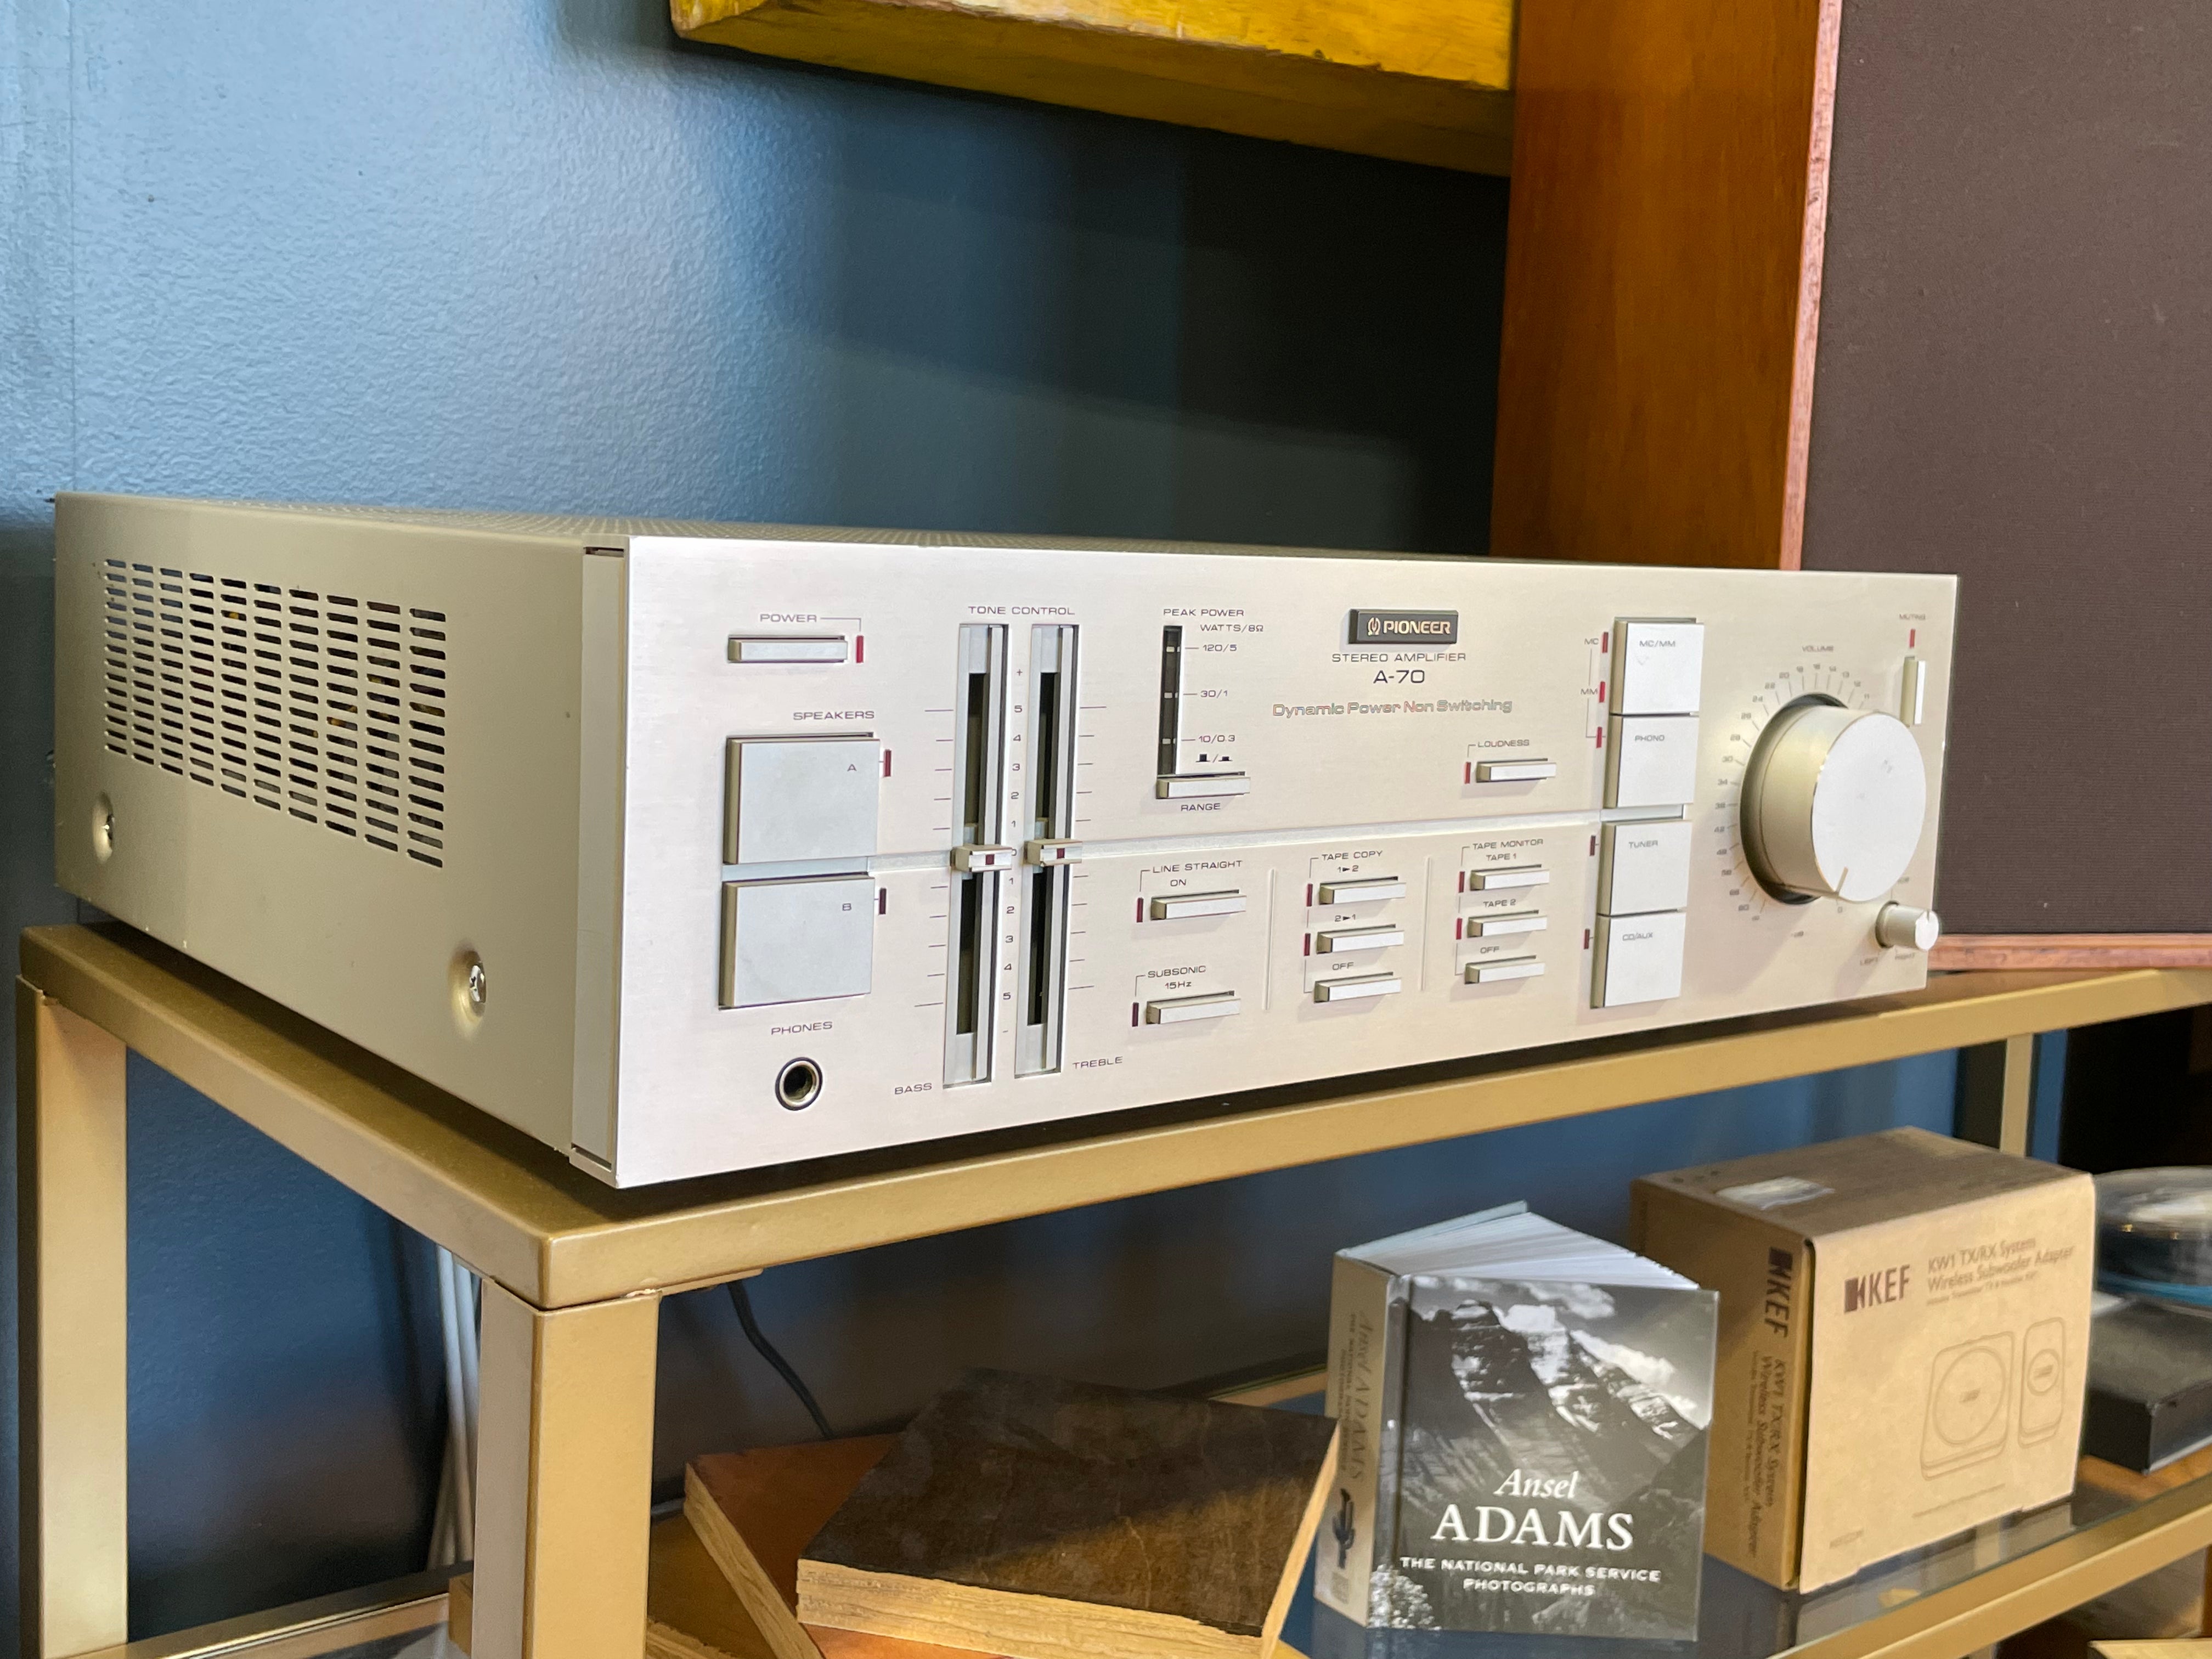 Pioneer A-70 Integrated Amplifier – Holt Hill Audio